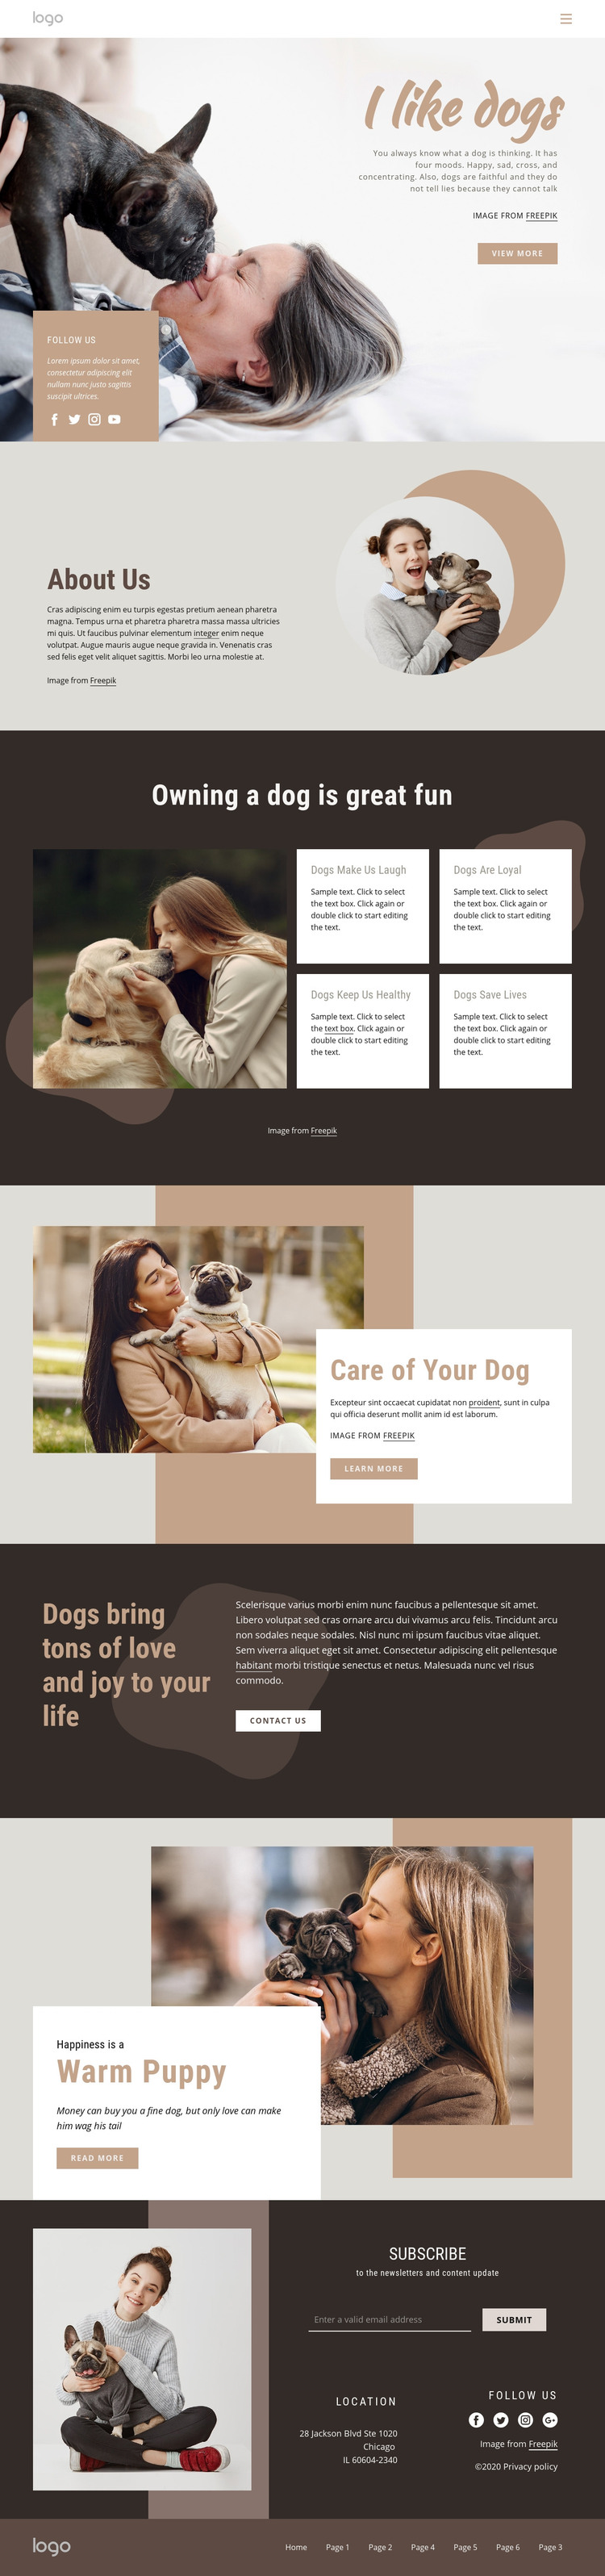 All about dogs Homepage Design